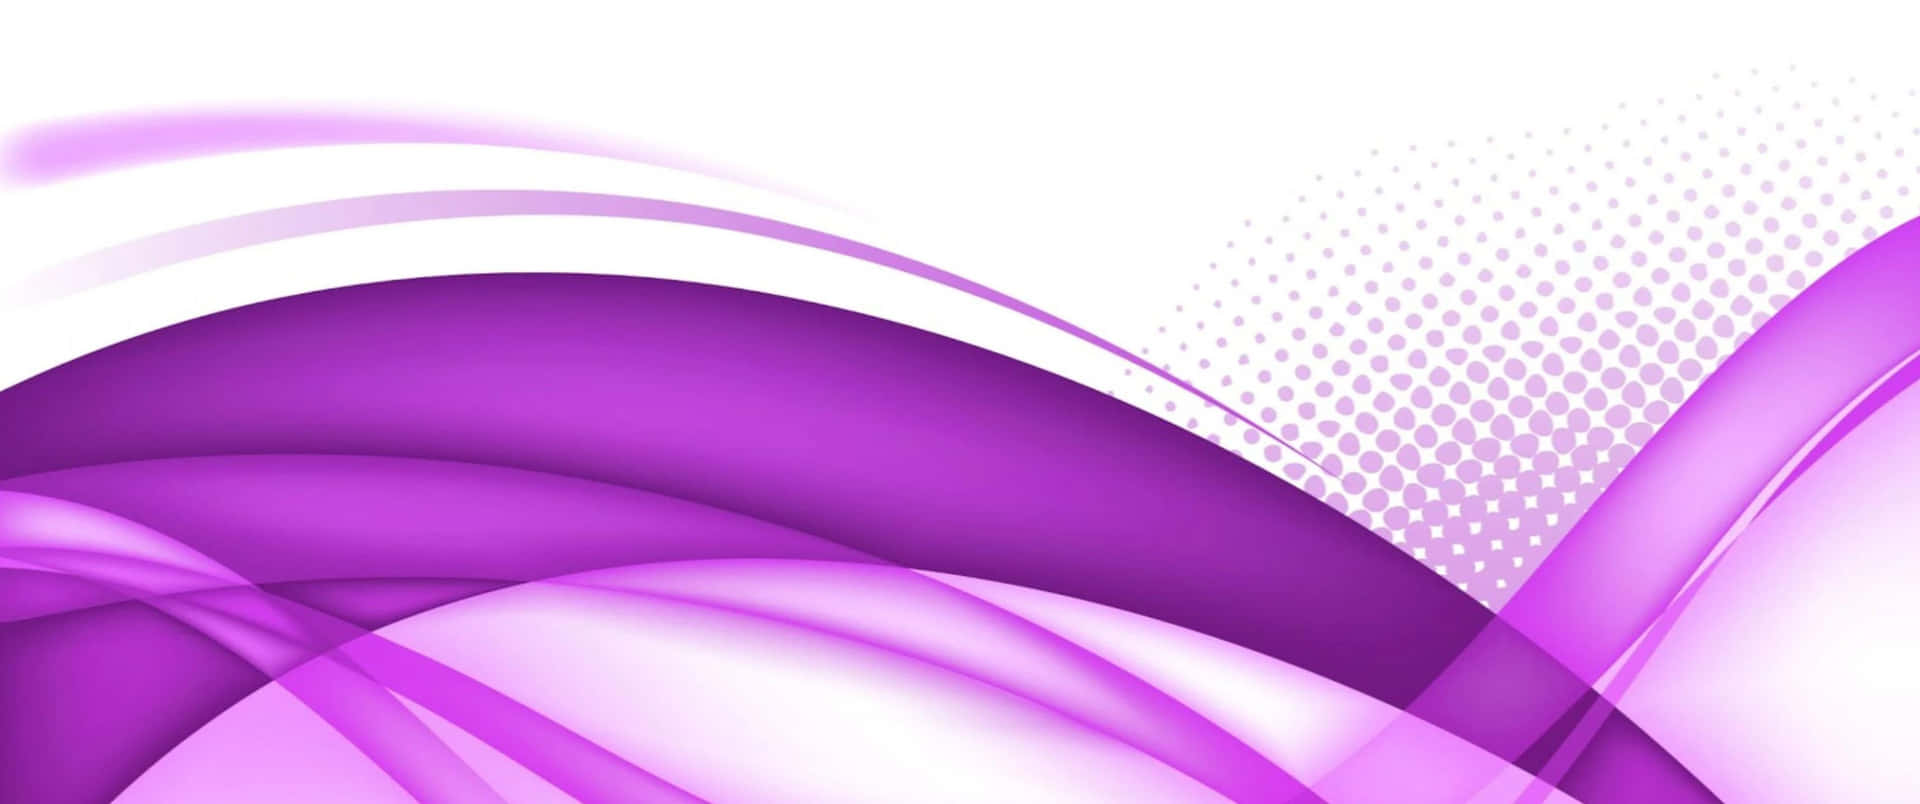 An abstract view of purple and white